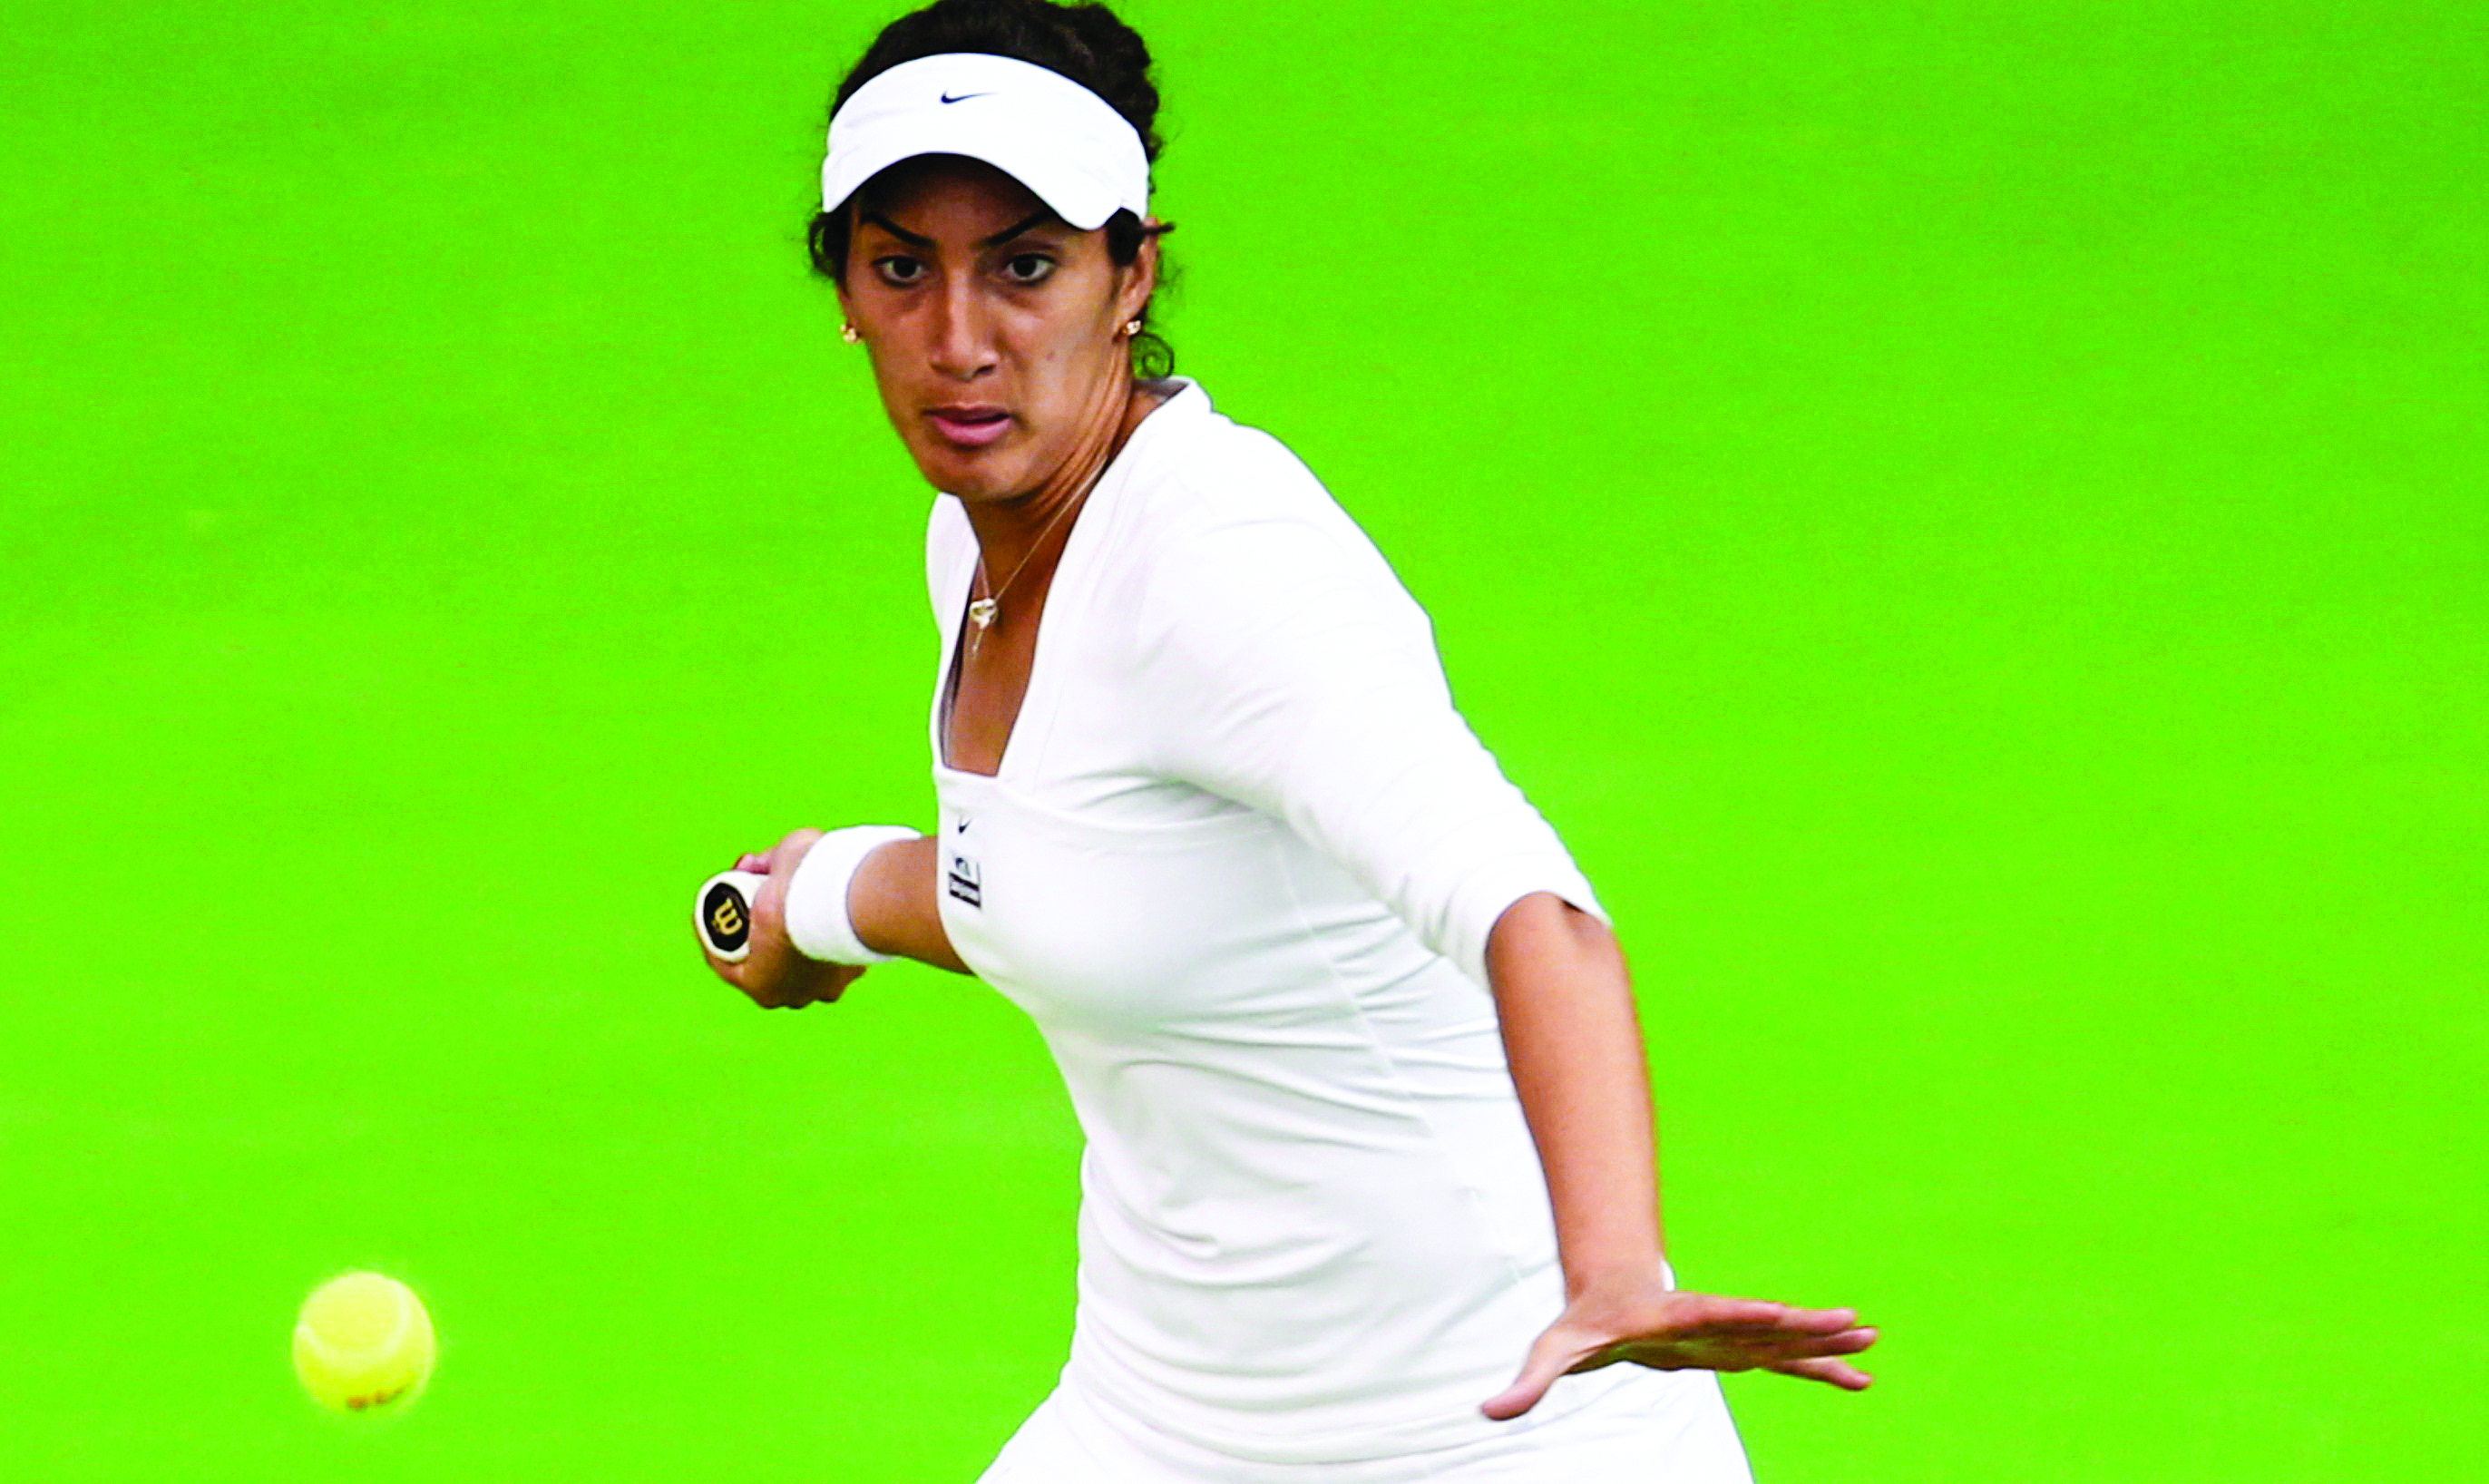 Oman’s Fatma Al Nabhani loses in doubles first round at Lagos tourney